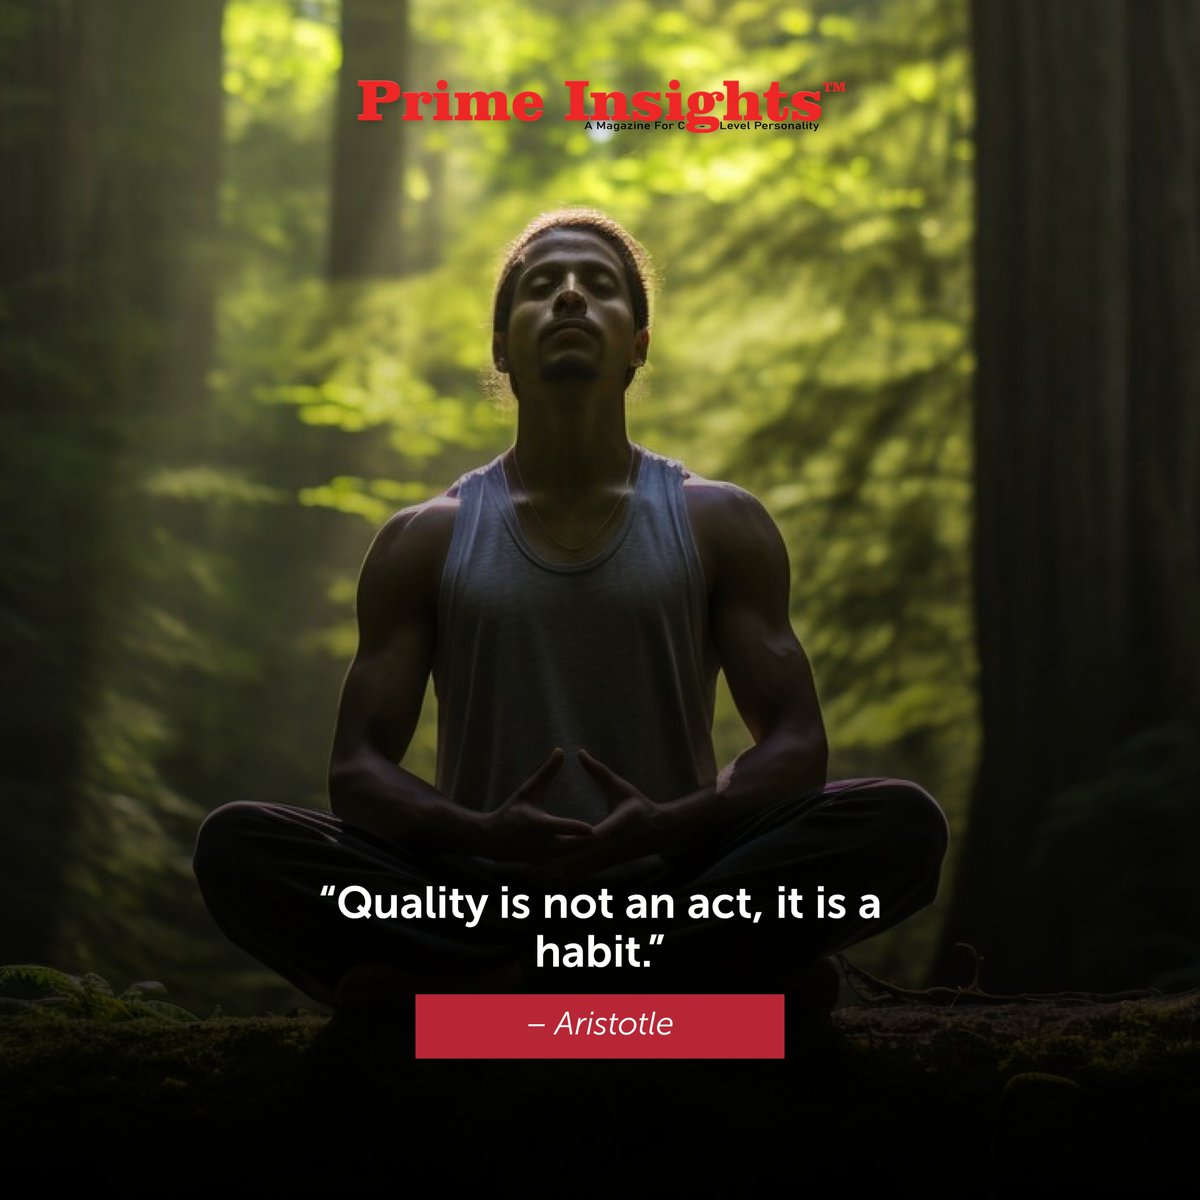 “Quality is not an act, it is a habit.”
– Aristotle

primeinsights.in

#success #quoteoftheday #quoteoftheweek #successquotes #successgoals #quotesforsuccess #inspirationalquotes #motivationalquotes #inspiringthoughts